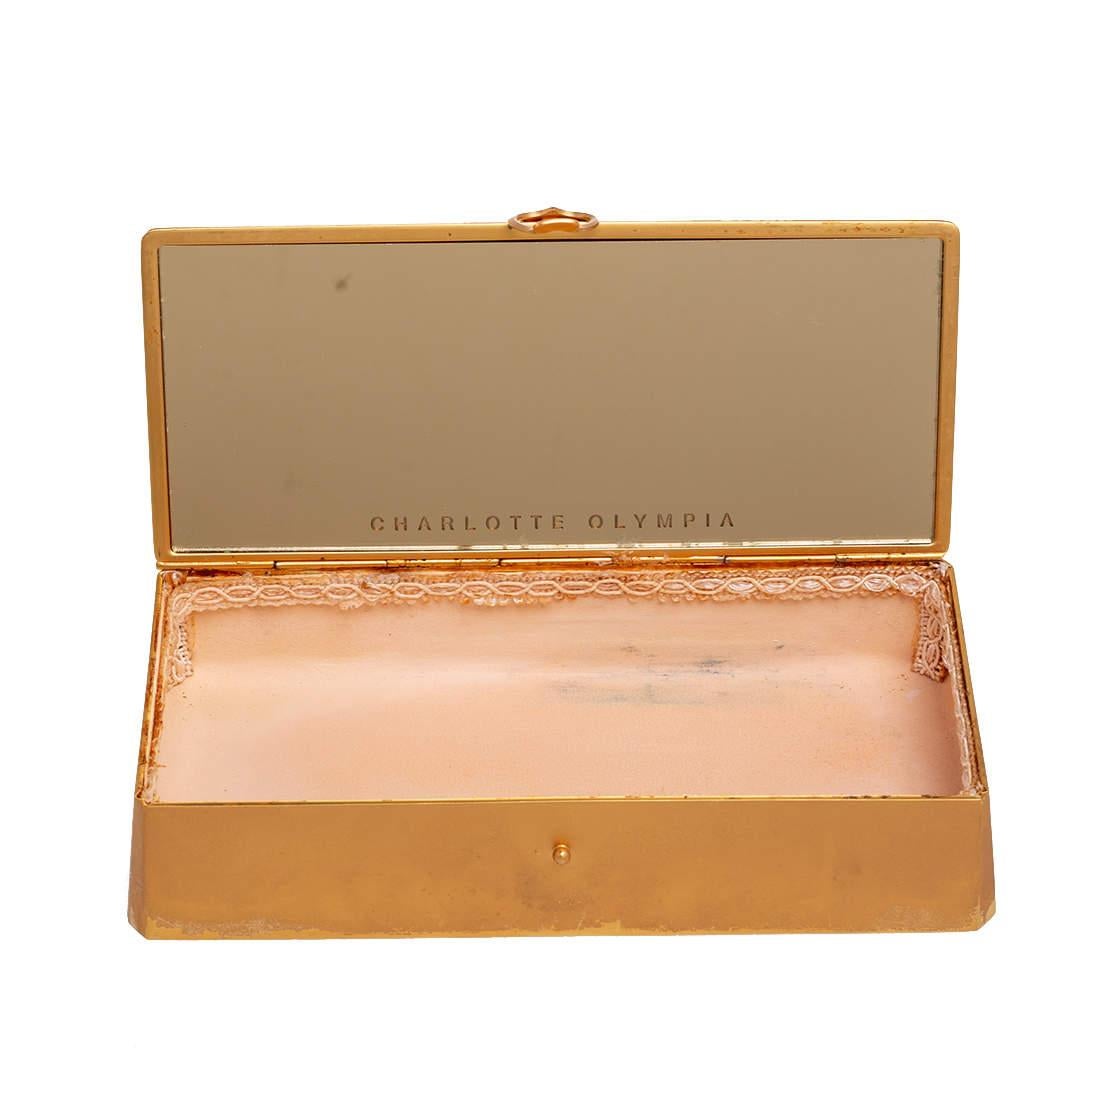 Charlotte Olympia Gold-Metall-Clutch im Angebot 3